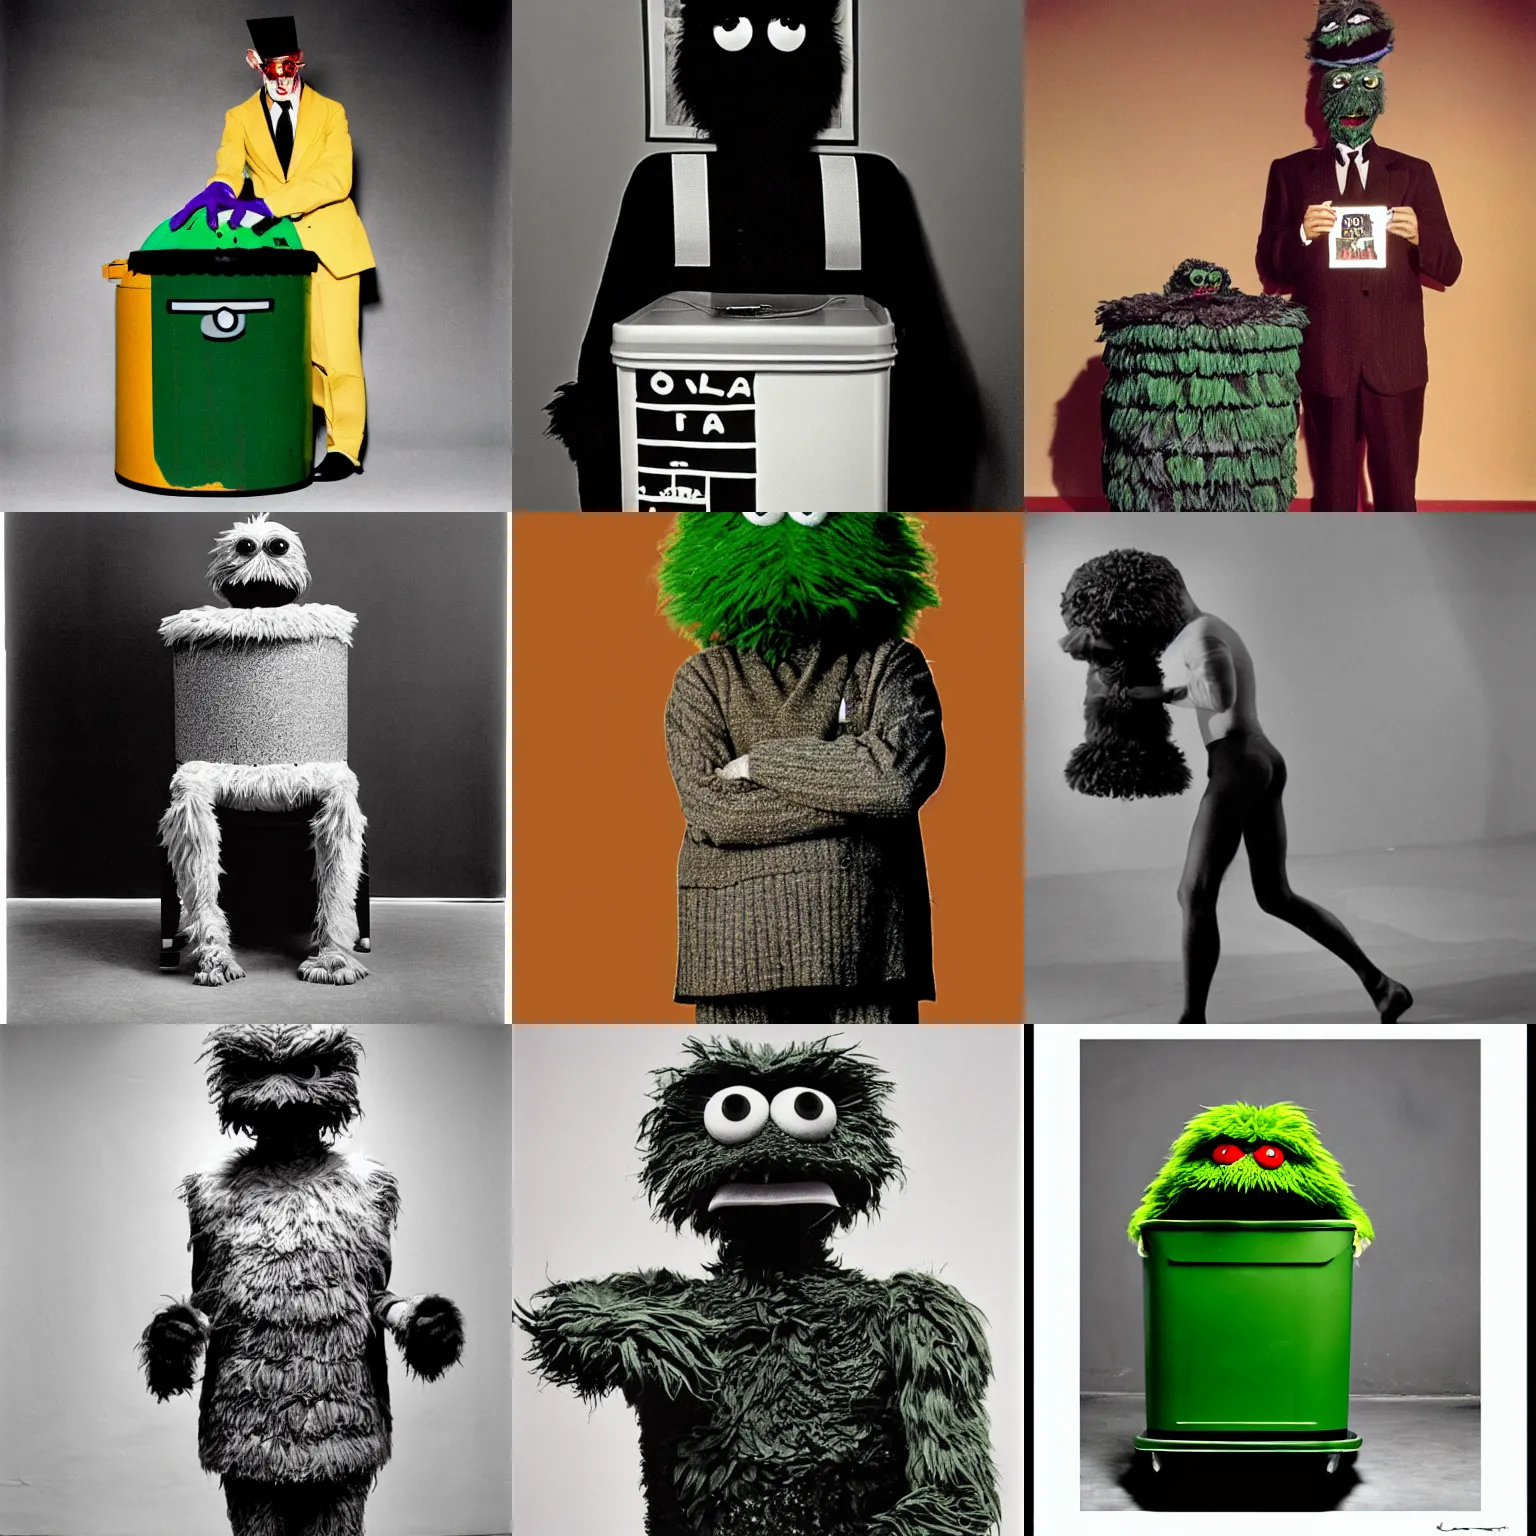 Prompt: a full body model photograph of oscar the grouch by hartmut newton